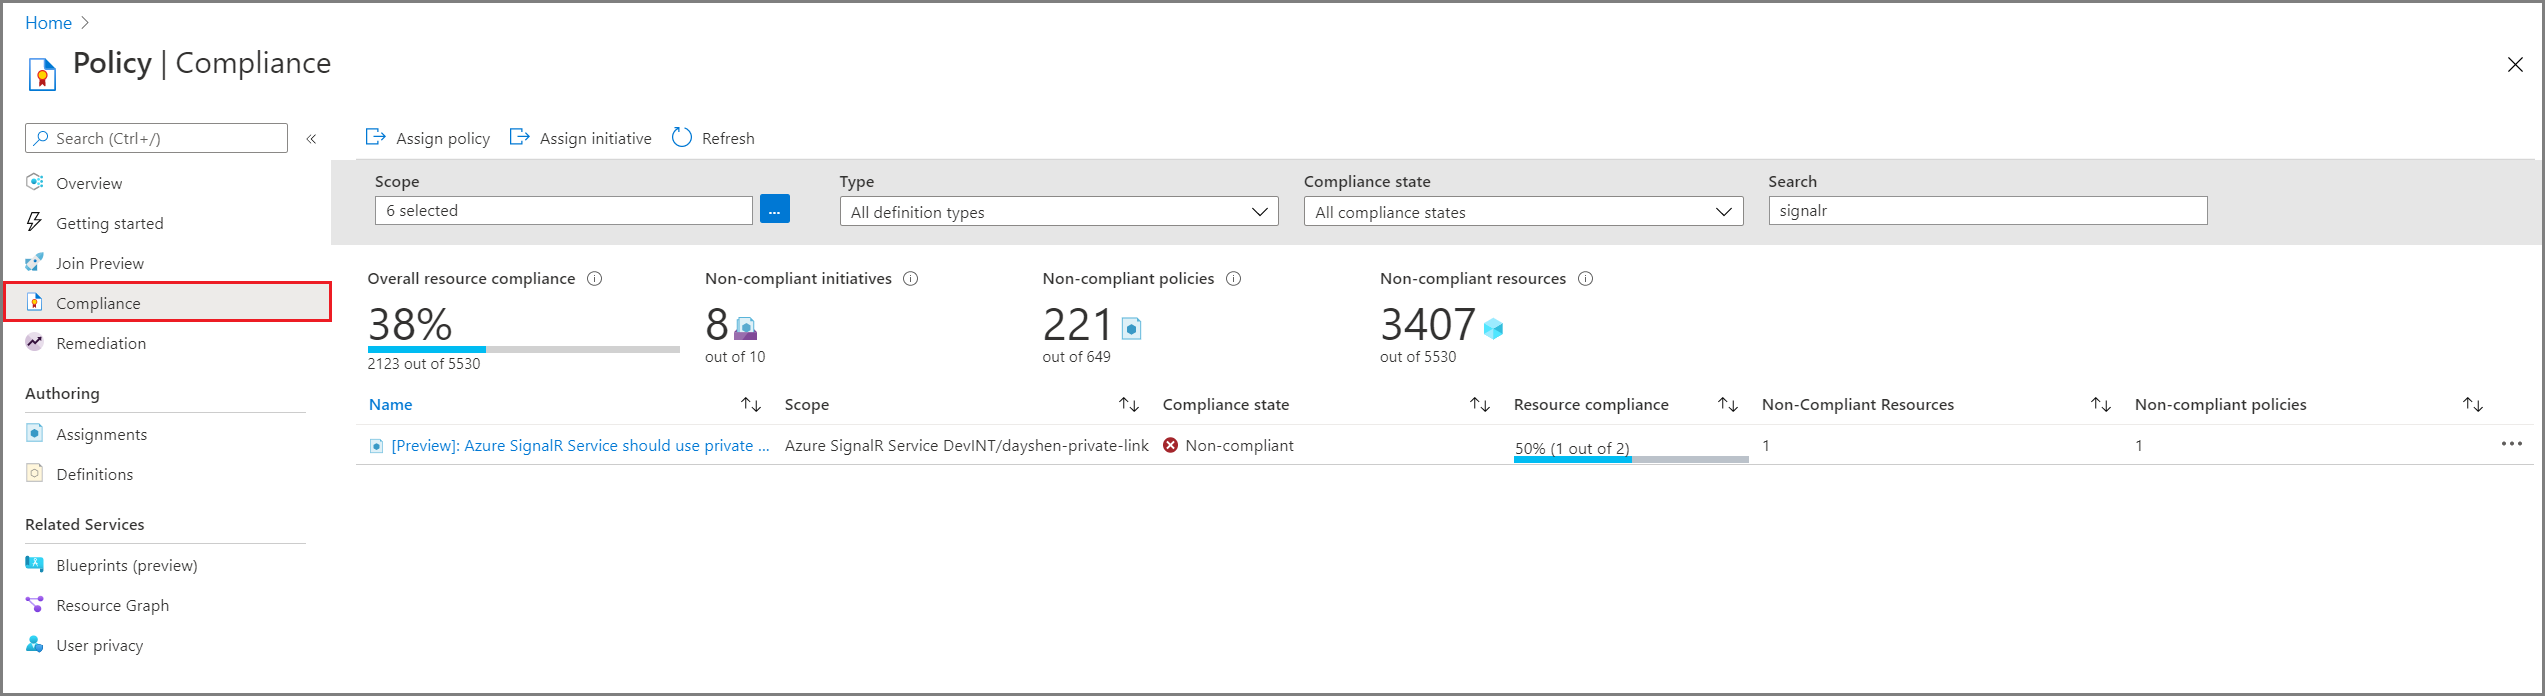 Policy compliance in portal